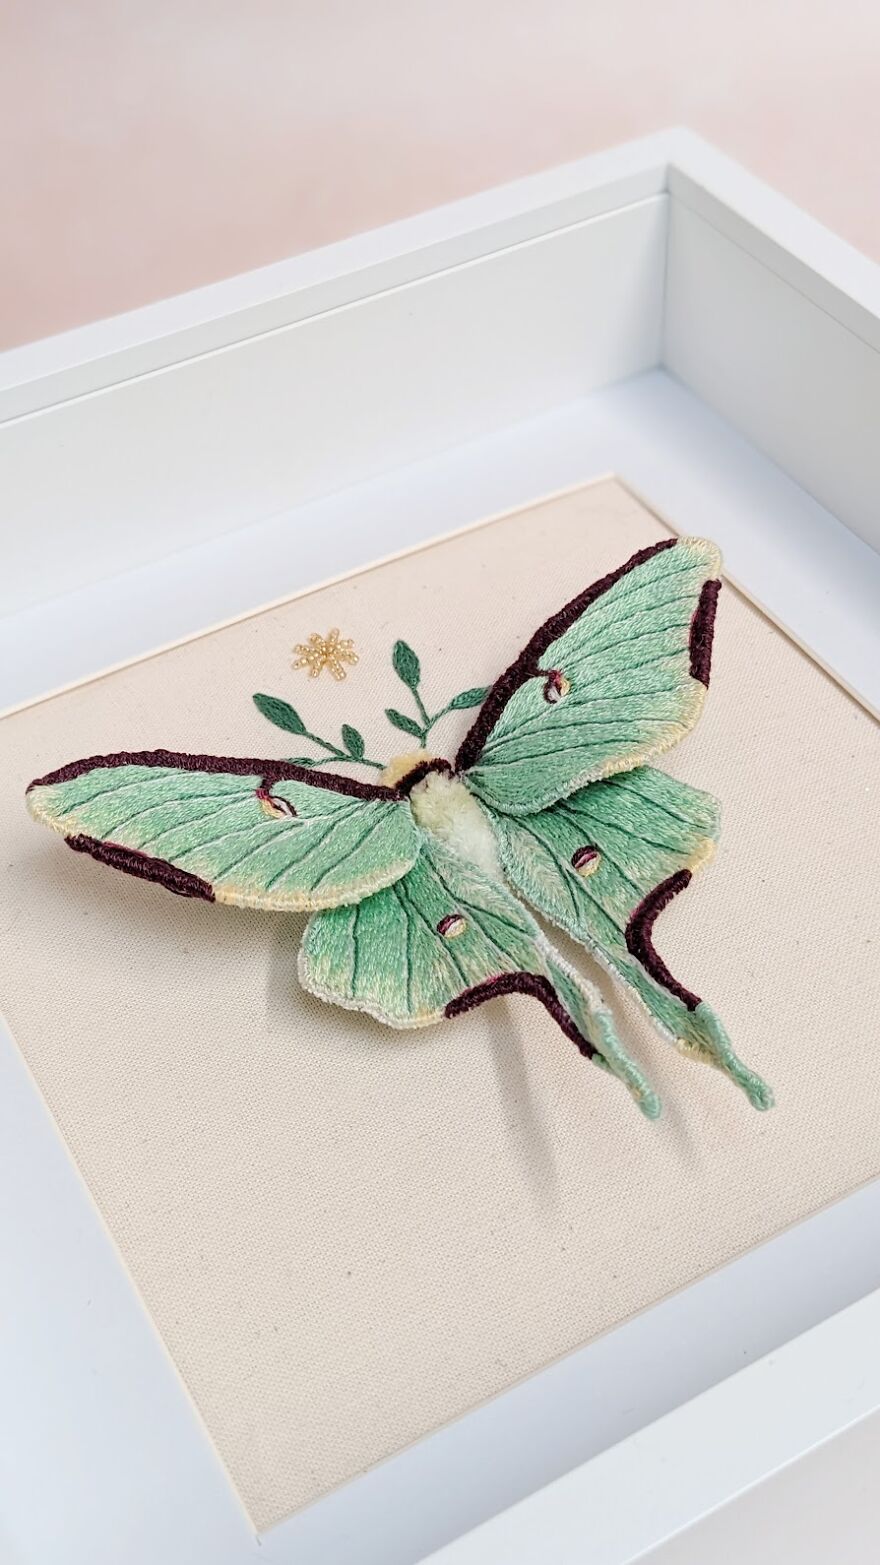 Realistic 3D Butterflies Made From Thread And Wire